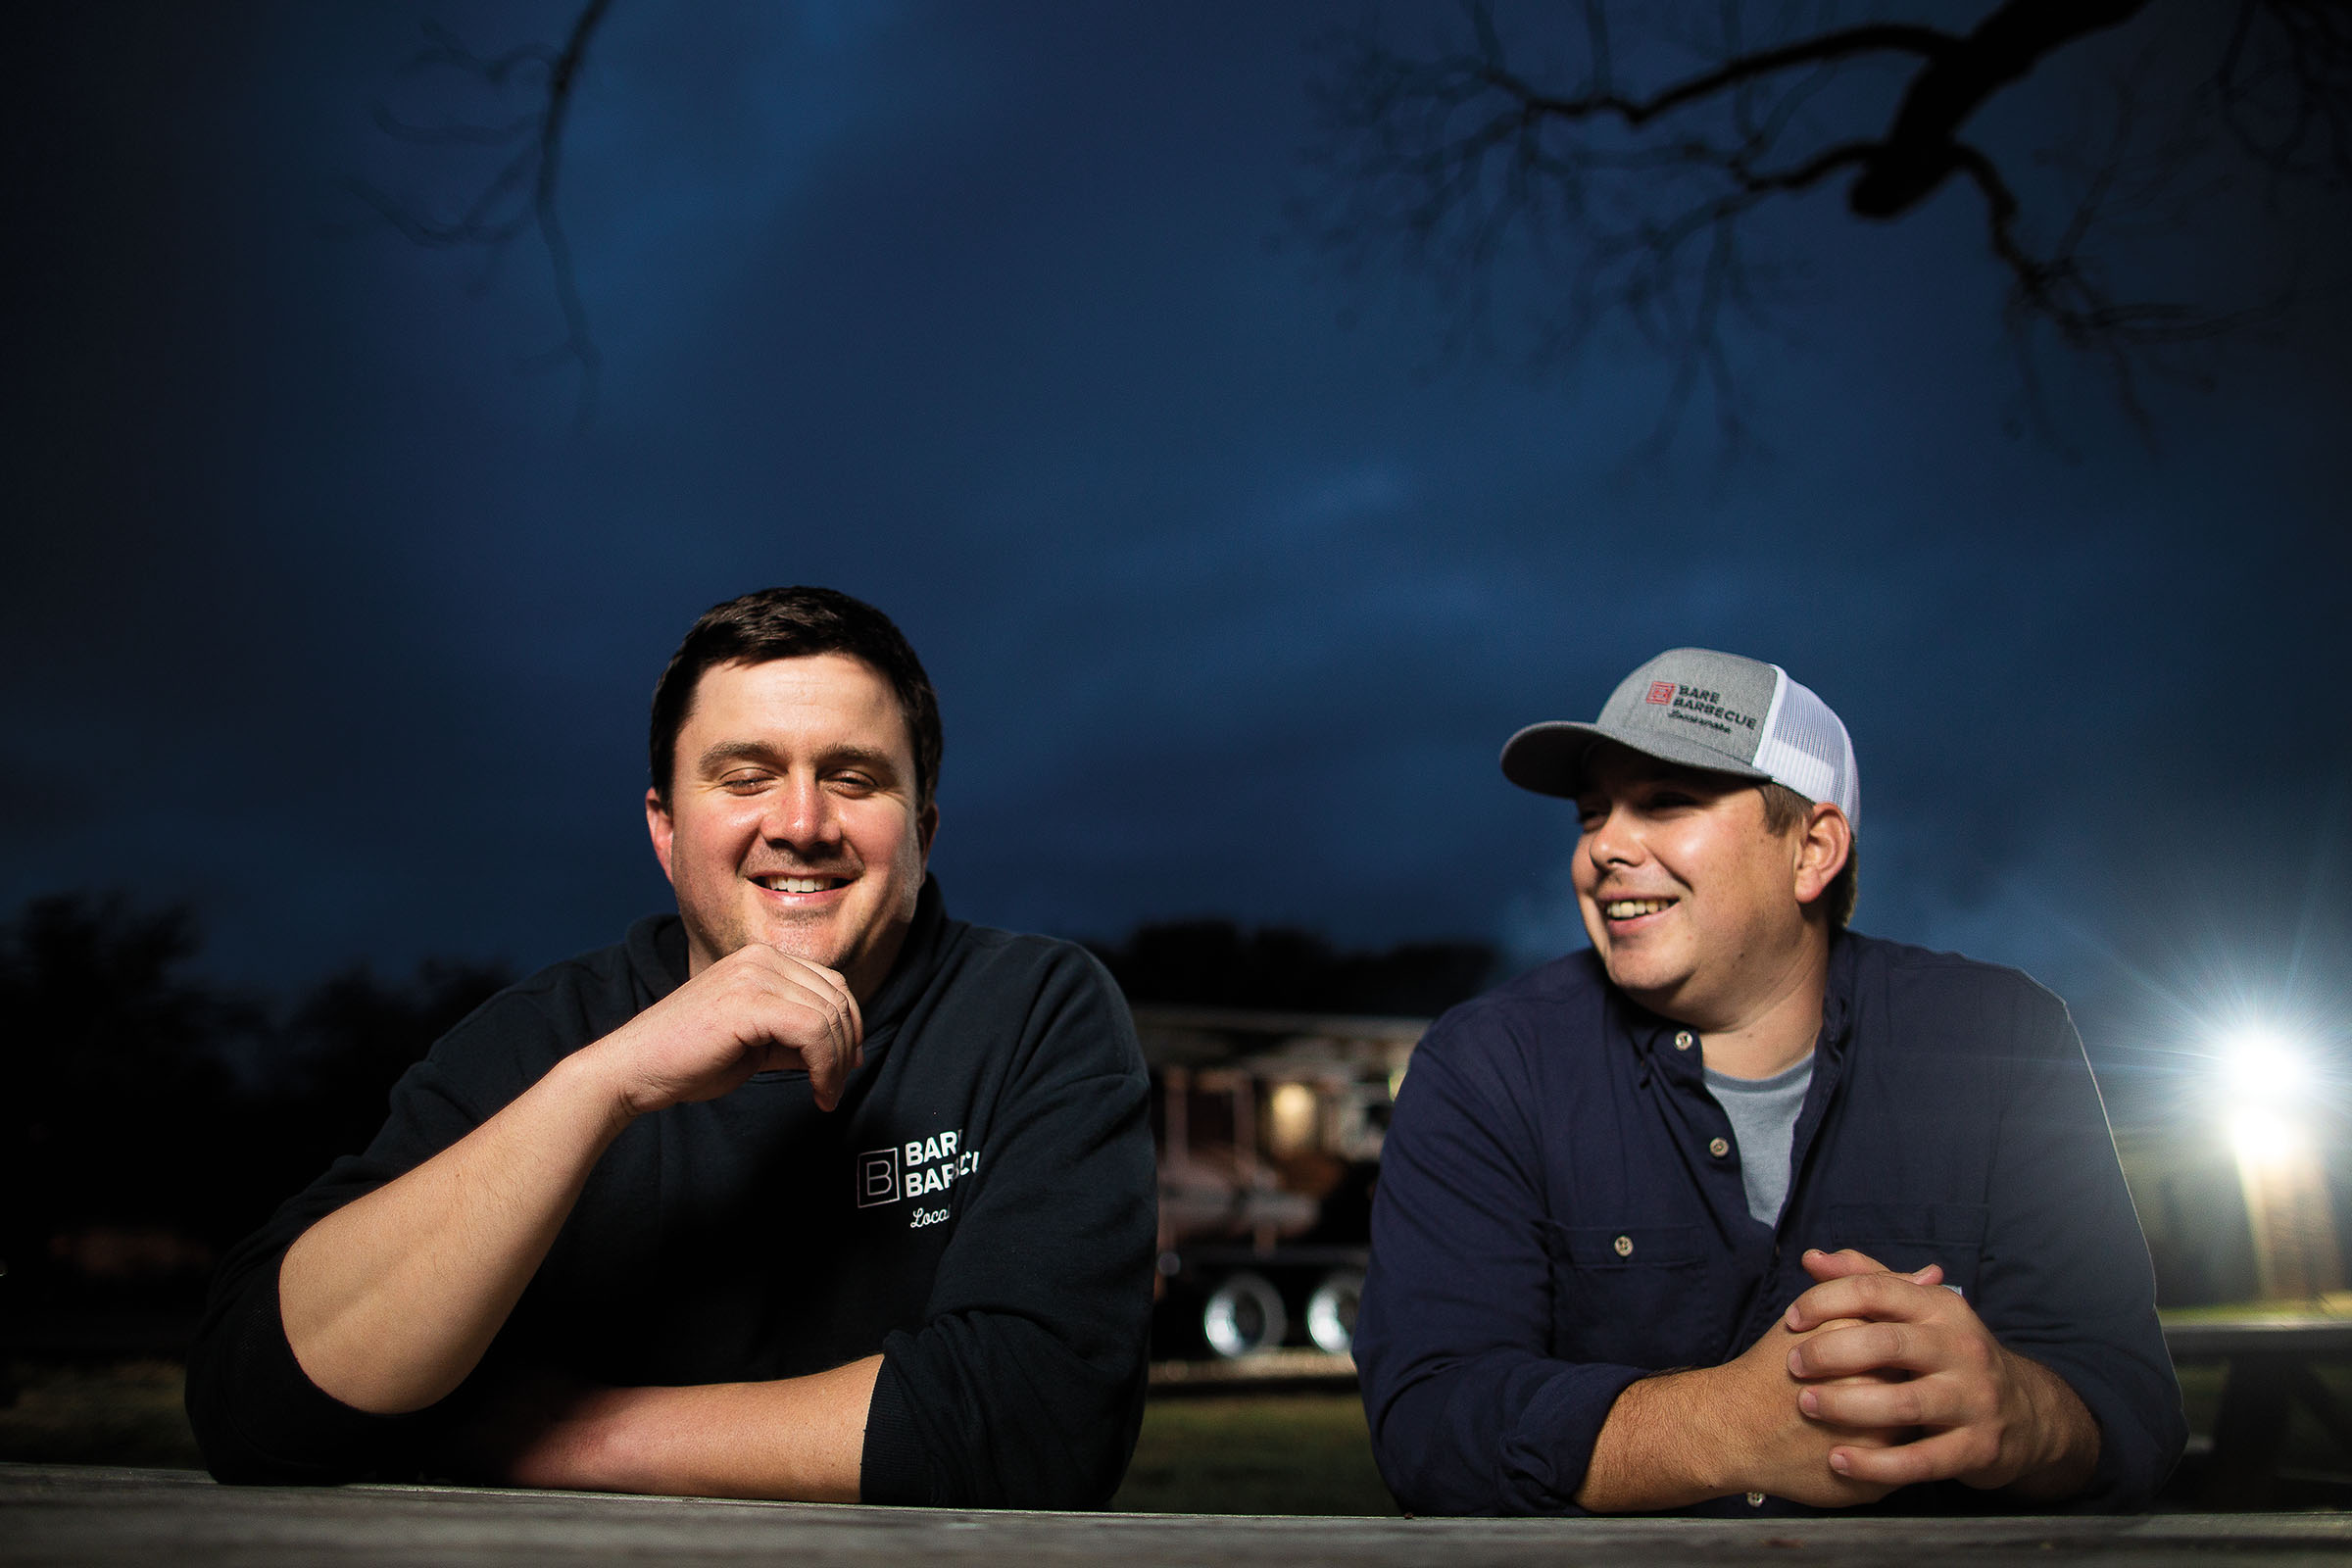 Two men laugh at a picnic table underneath a dark blue night sky